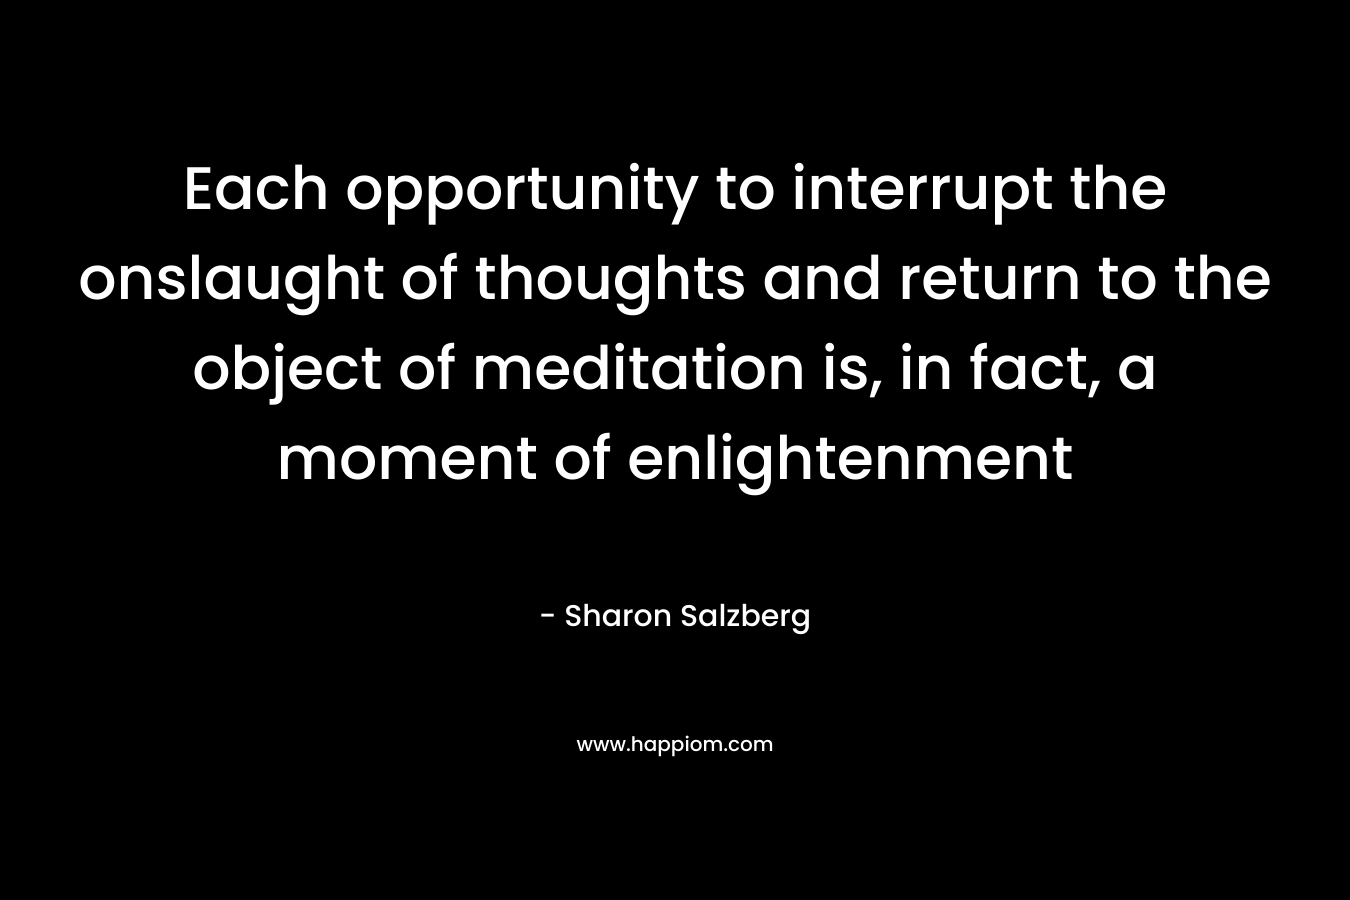 Each opportunity to interrupt the onslaught of thoughts and return to the object of meditation is, in fact, a moment of enlightenment